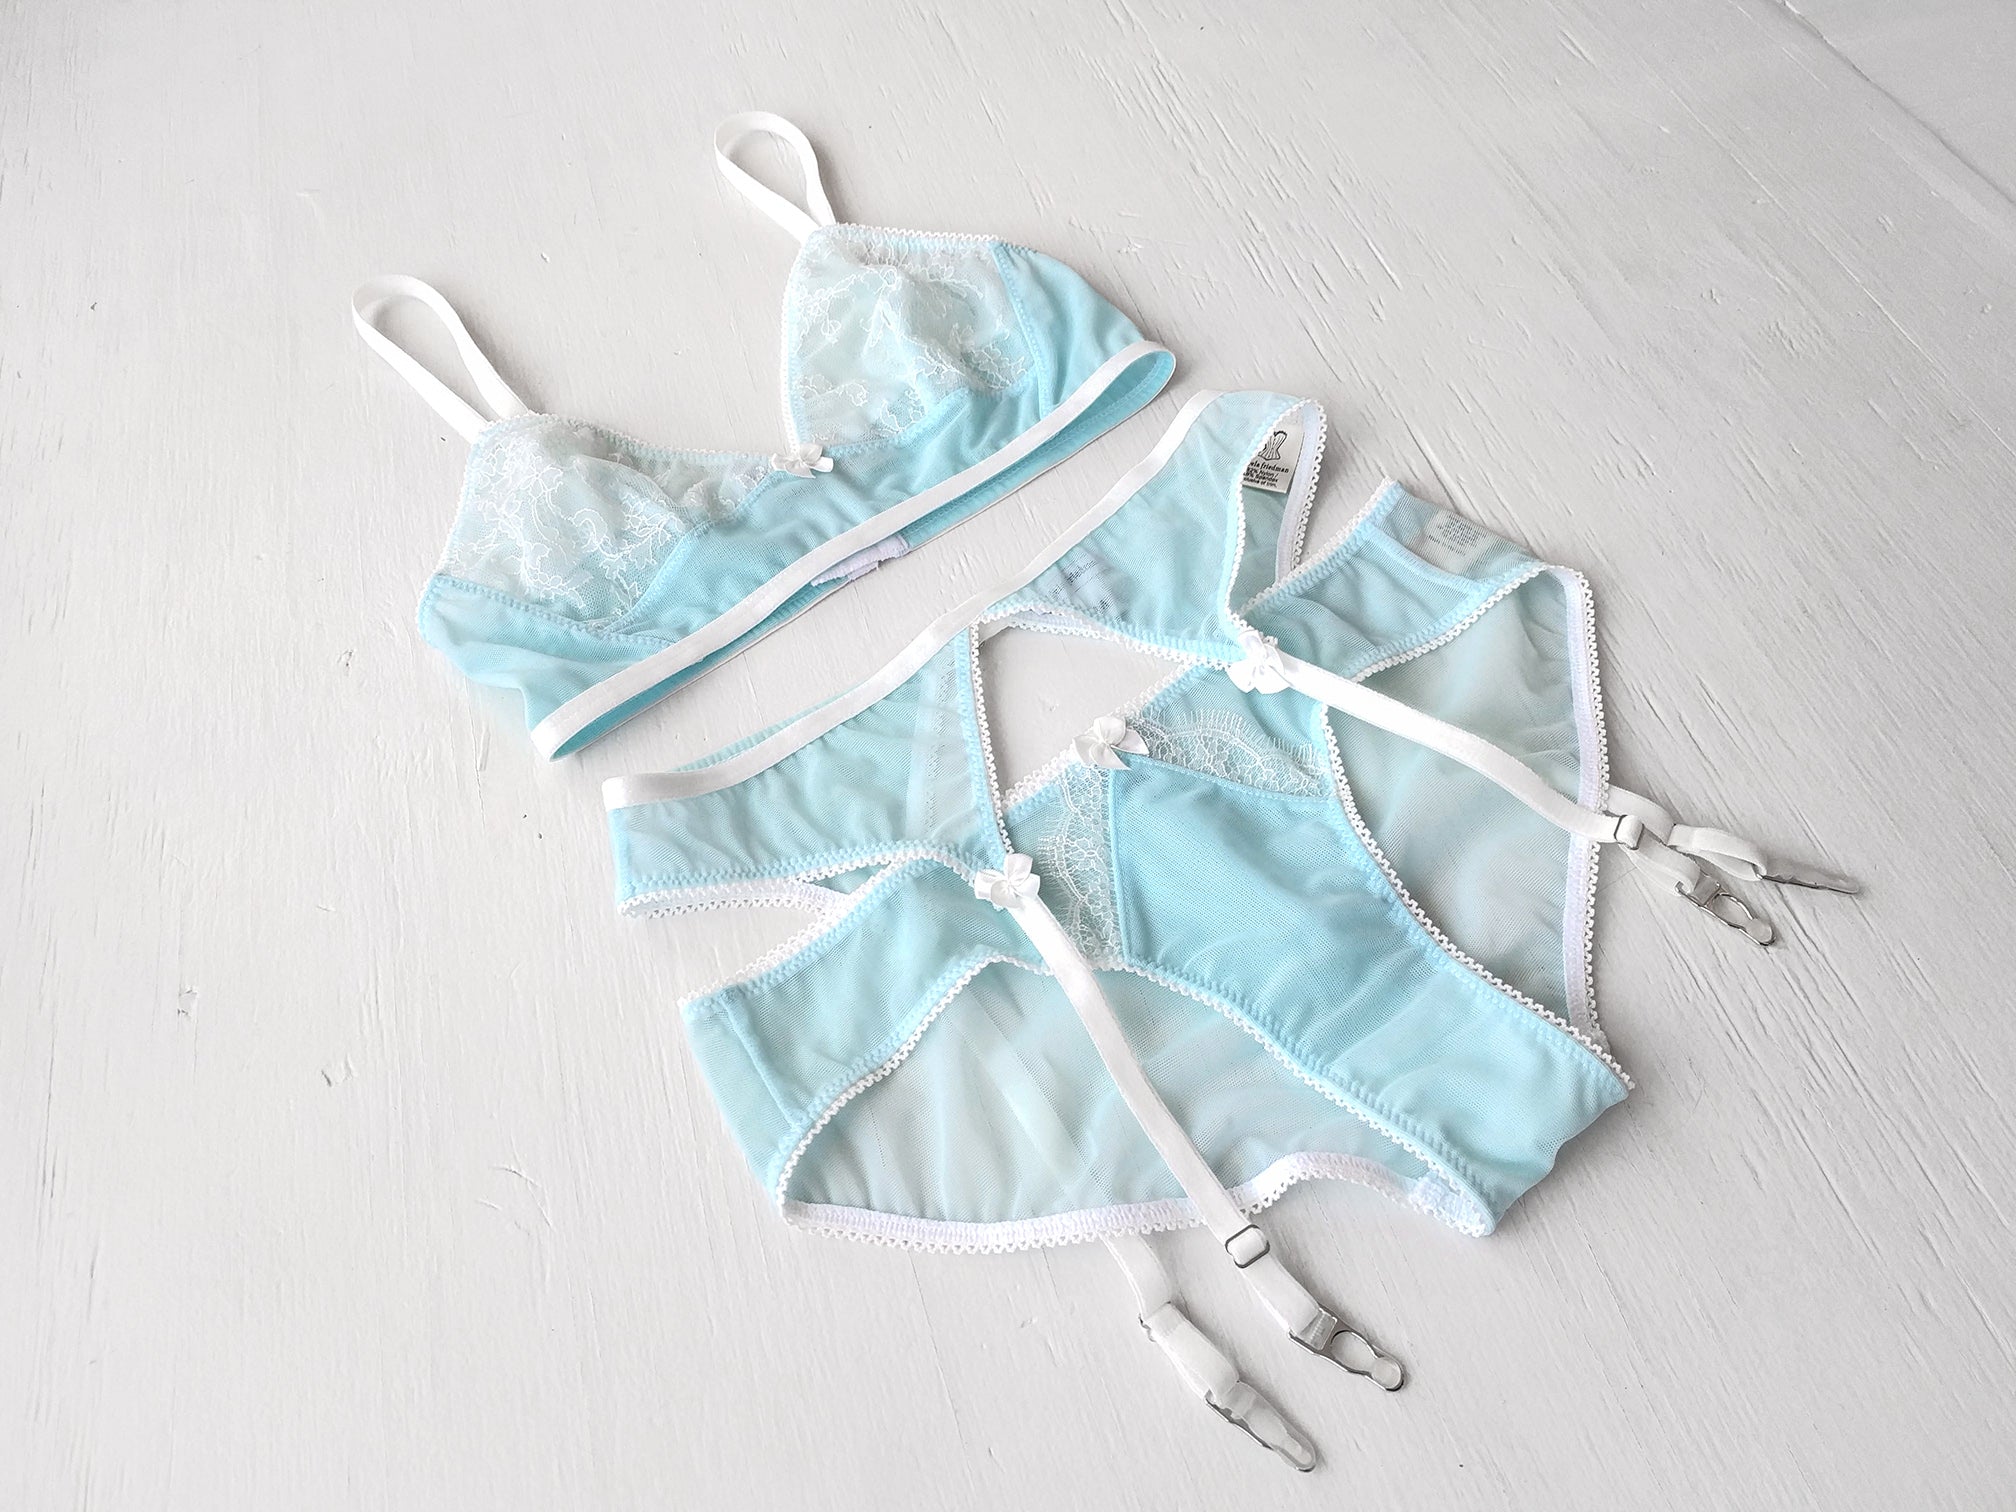 Spring lingerie sets for "something blue" brides with bralettes, garter belts, suspenders, and knickers